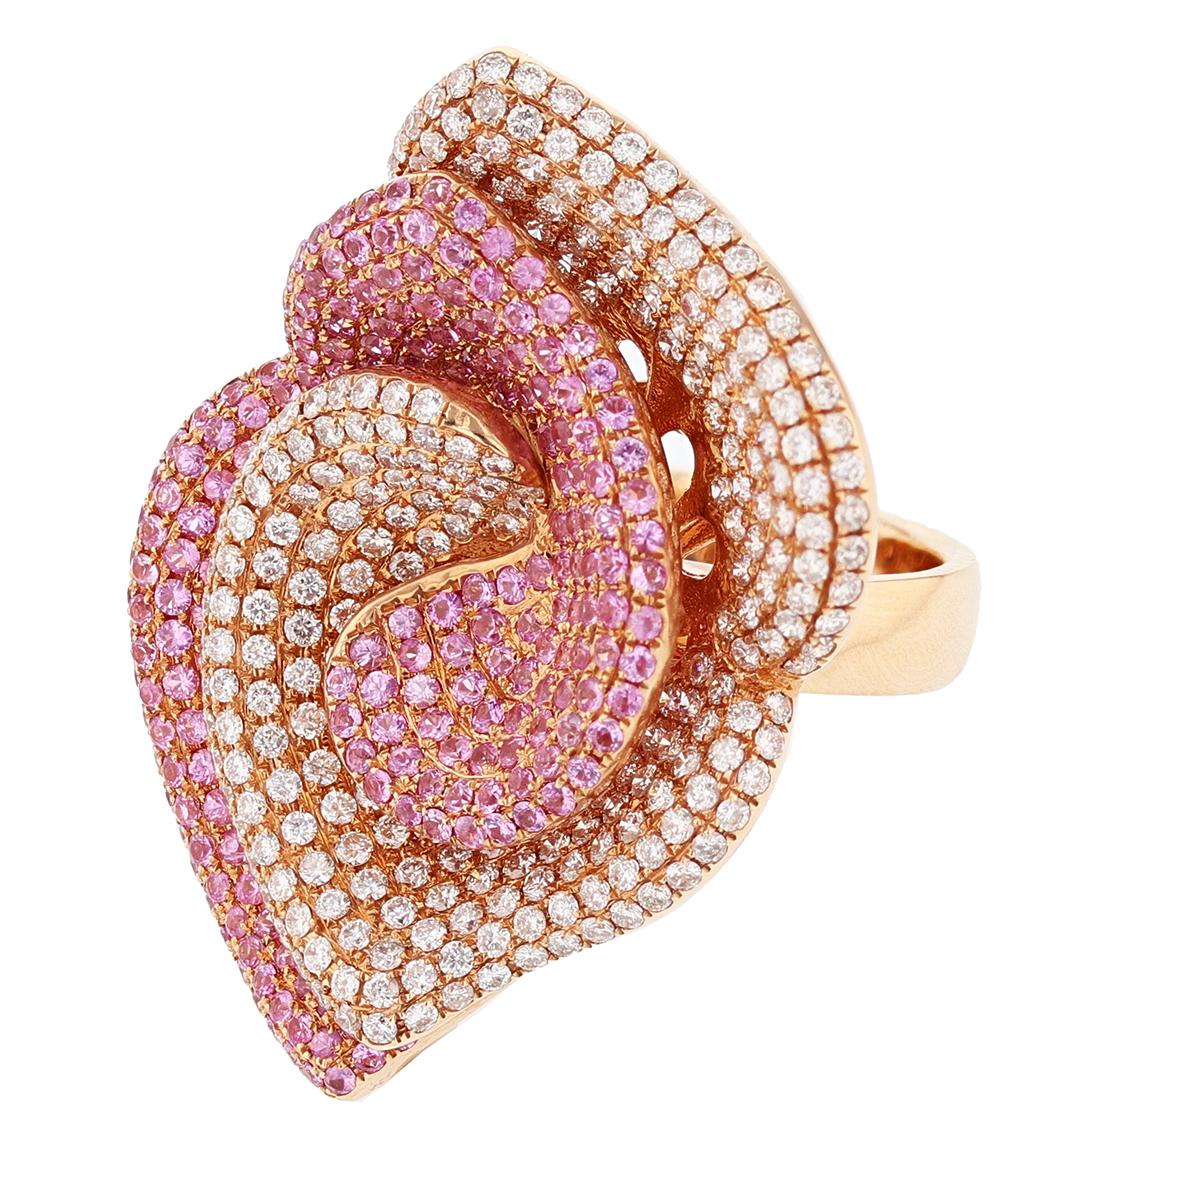 This ring is made in 18k rose gold. The ring features 274 round brilliant cut diamonds weighing 2.70ct and 245 round cut pink sapphires weighing 2.90ct.